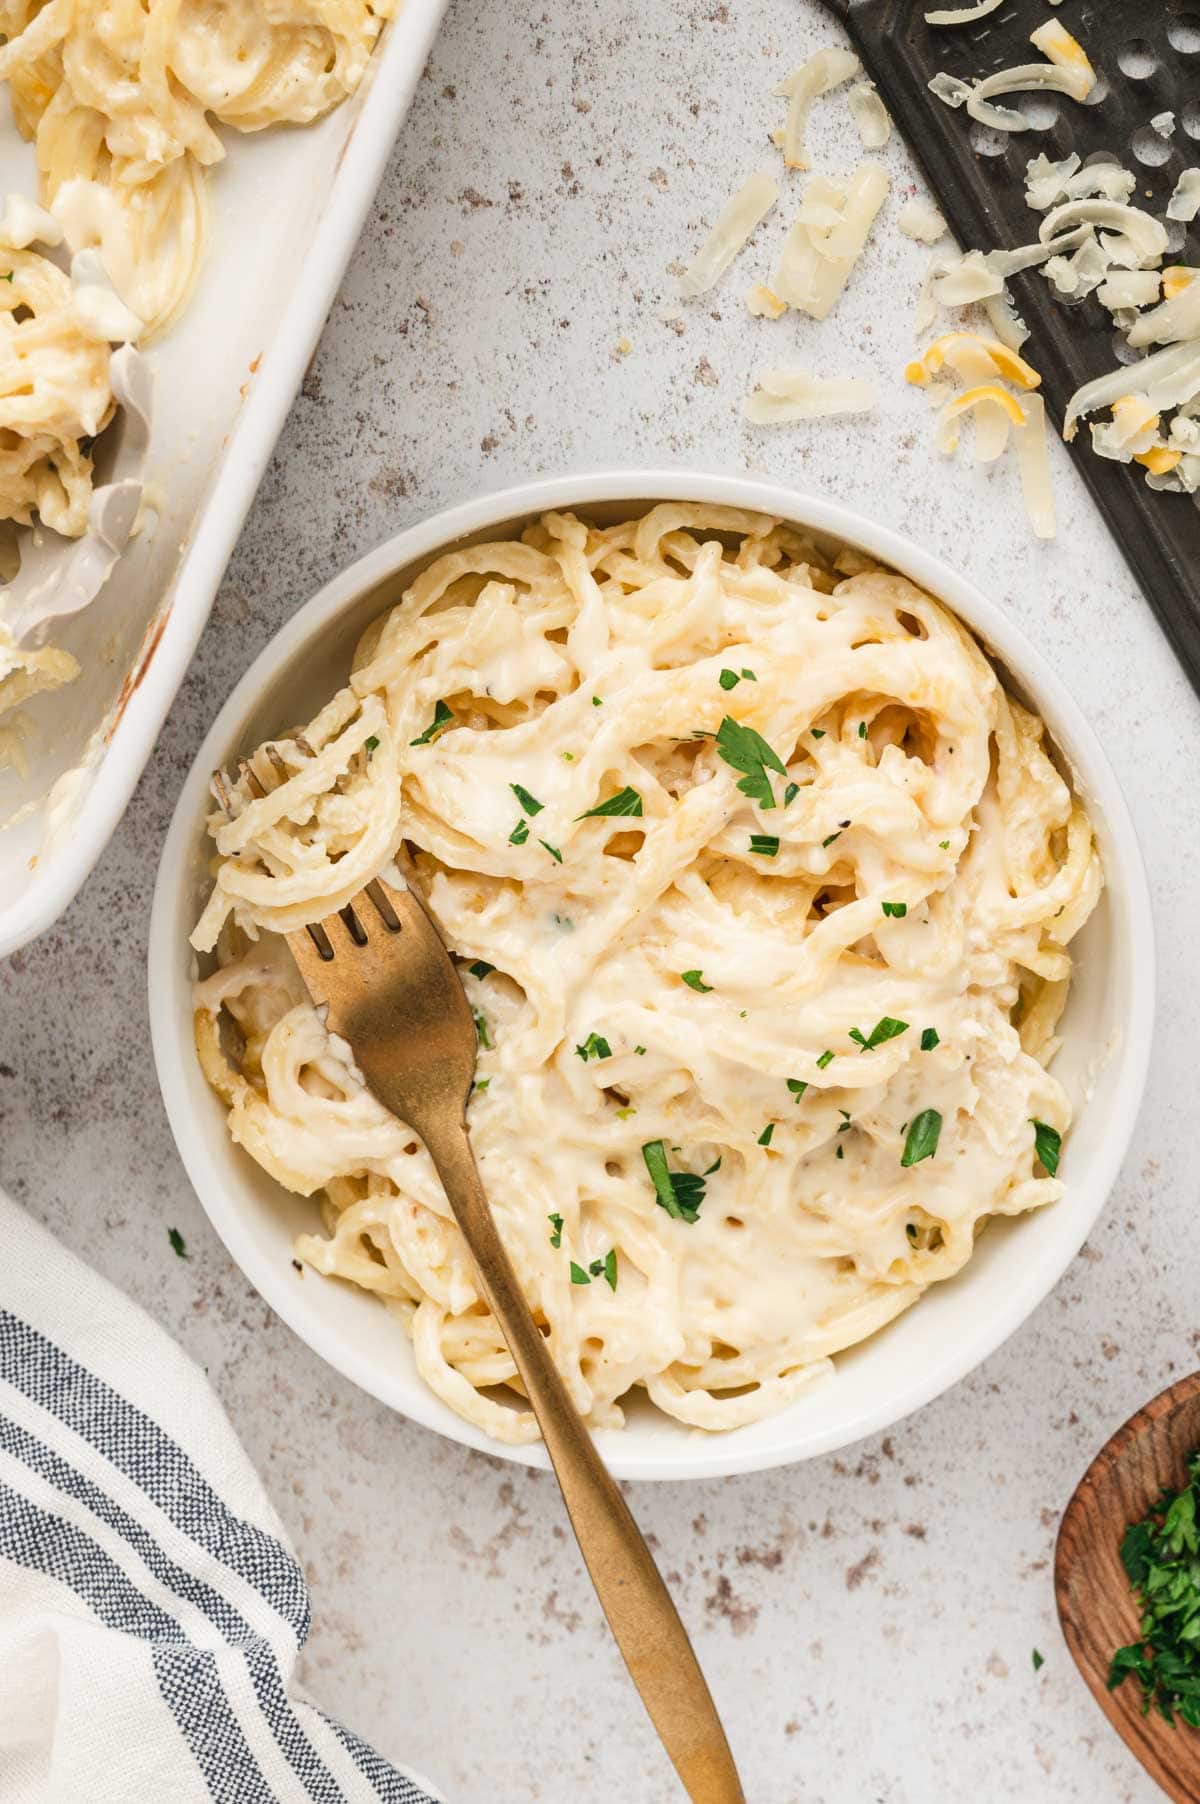 Small bowl with spaghetti in cheese sauce and a fork.